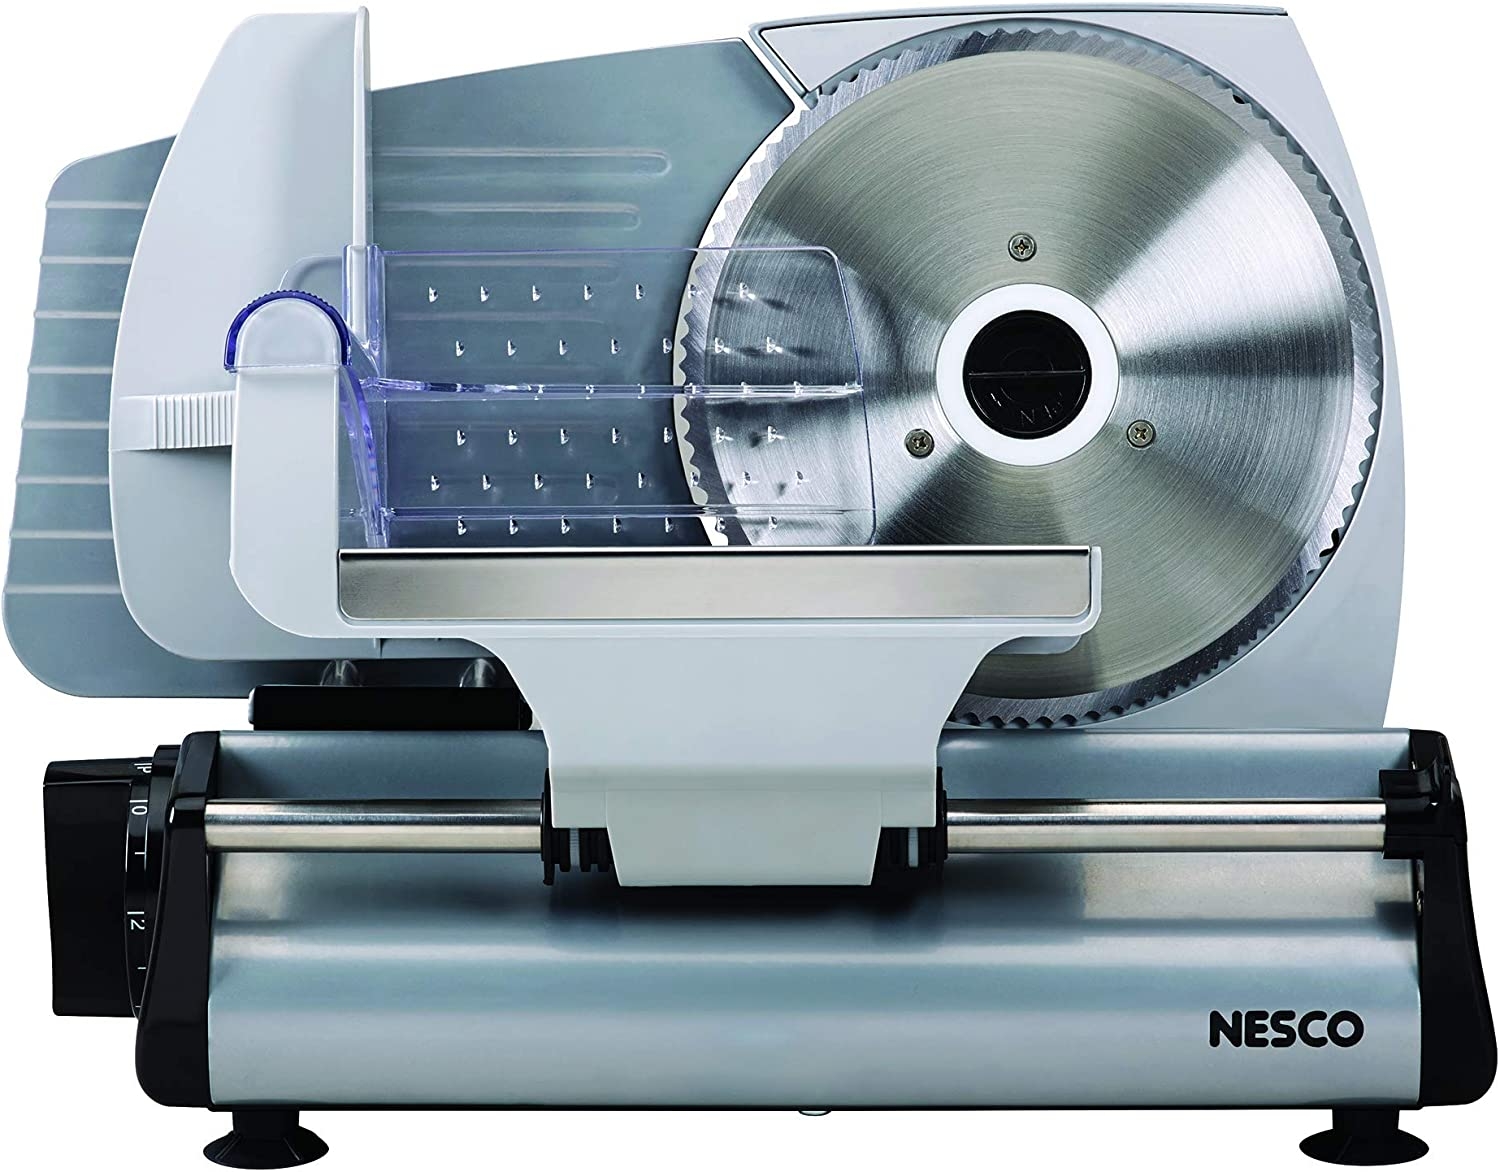 NESCO FS-200, Food Slicer, Gray, Aluminum with 7.5 inch Stainless Steel Blade, 180 watts, One Size Import To Shop ×Product